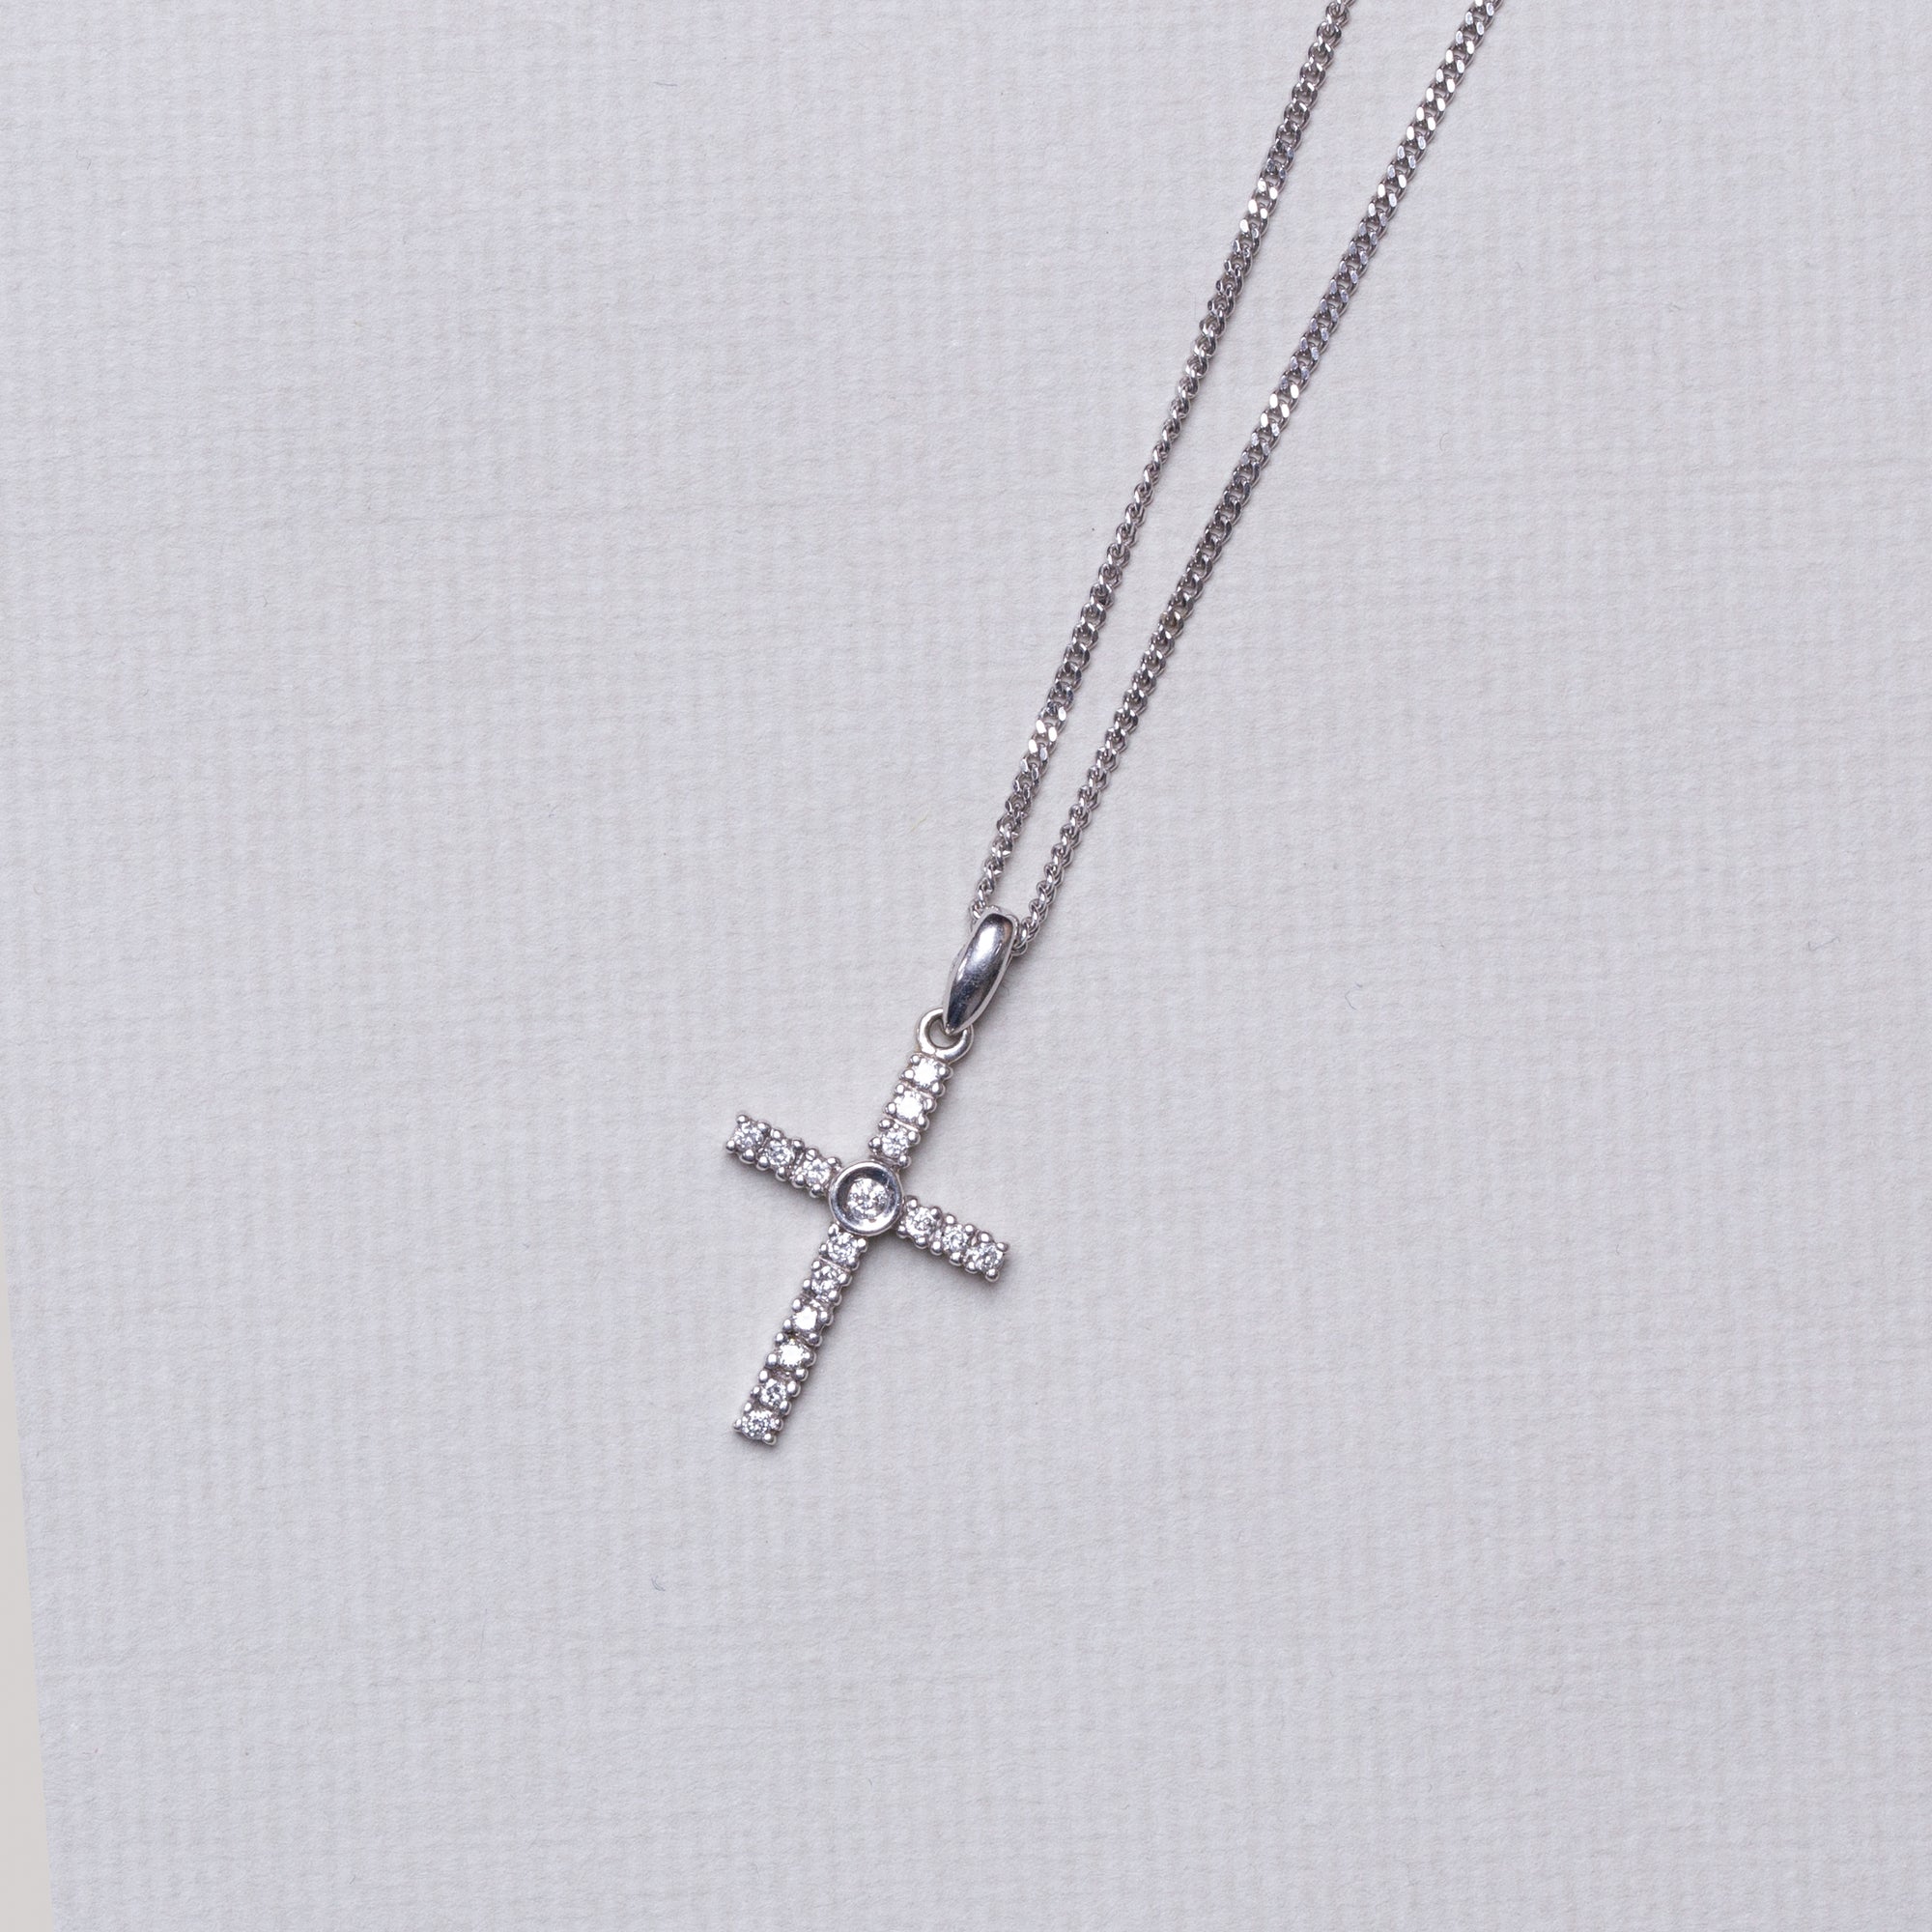 Vintage Cross Diamond Necklace in White Gold